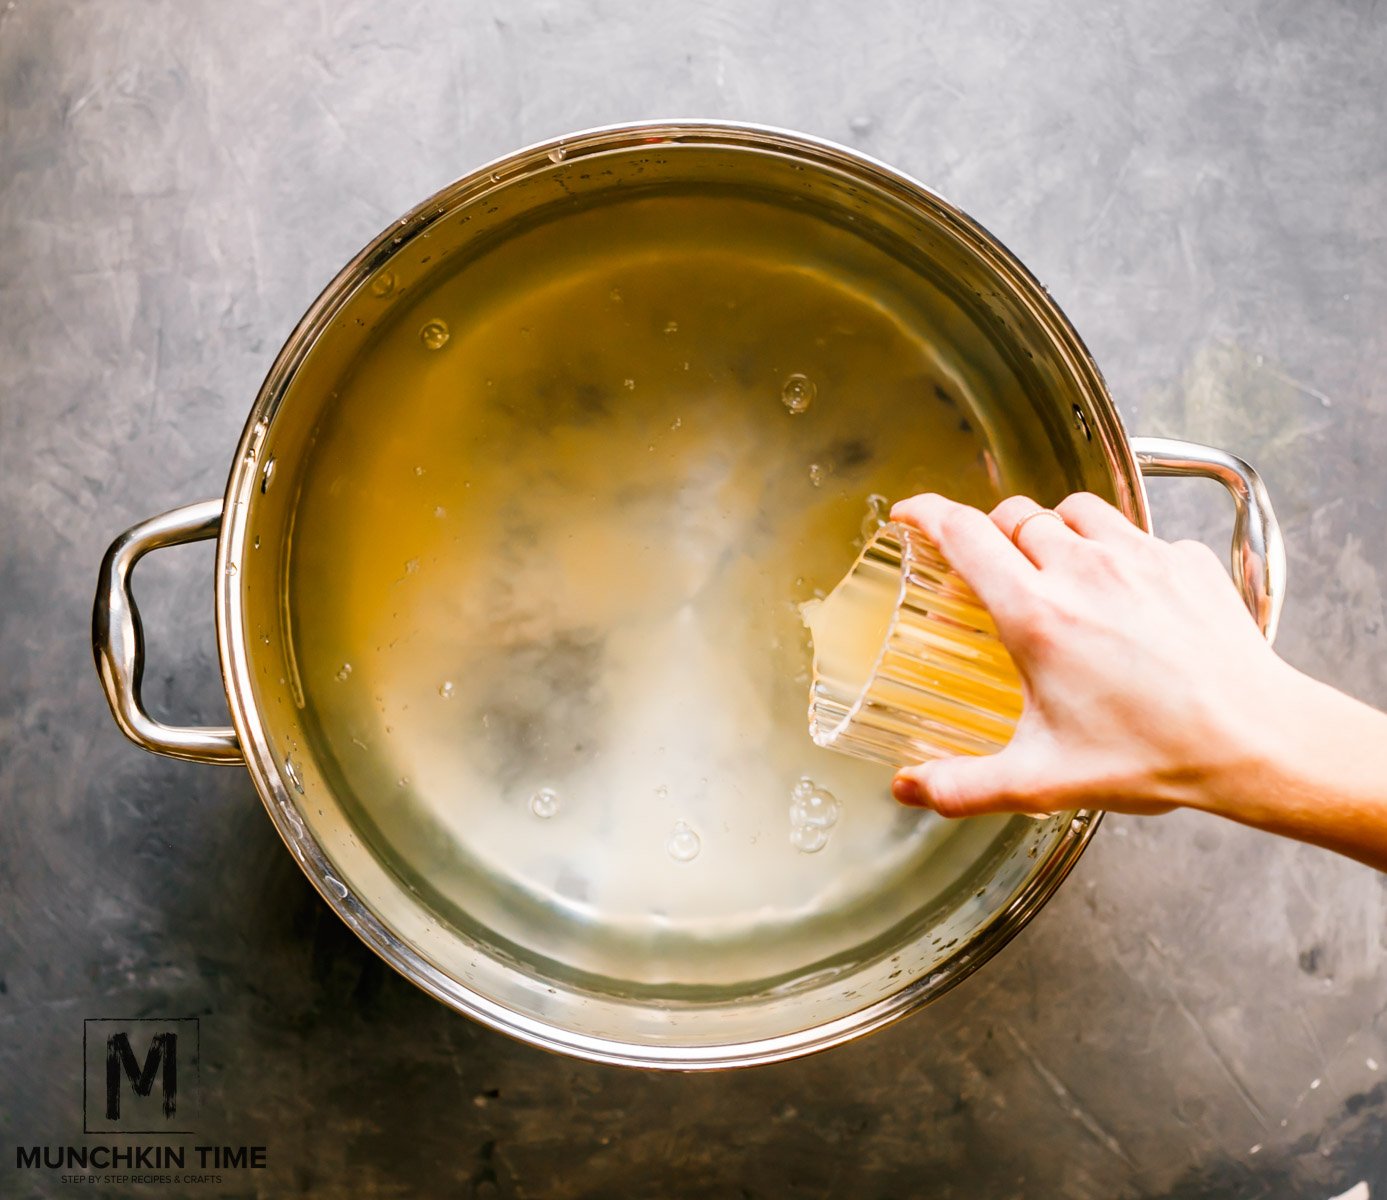 A hand pouring apple juice from a glass cup into a big pot filled with water.